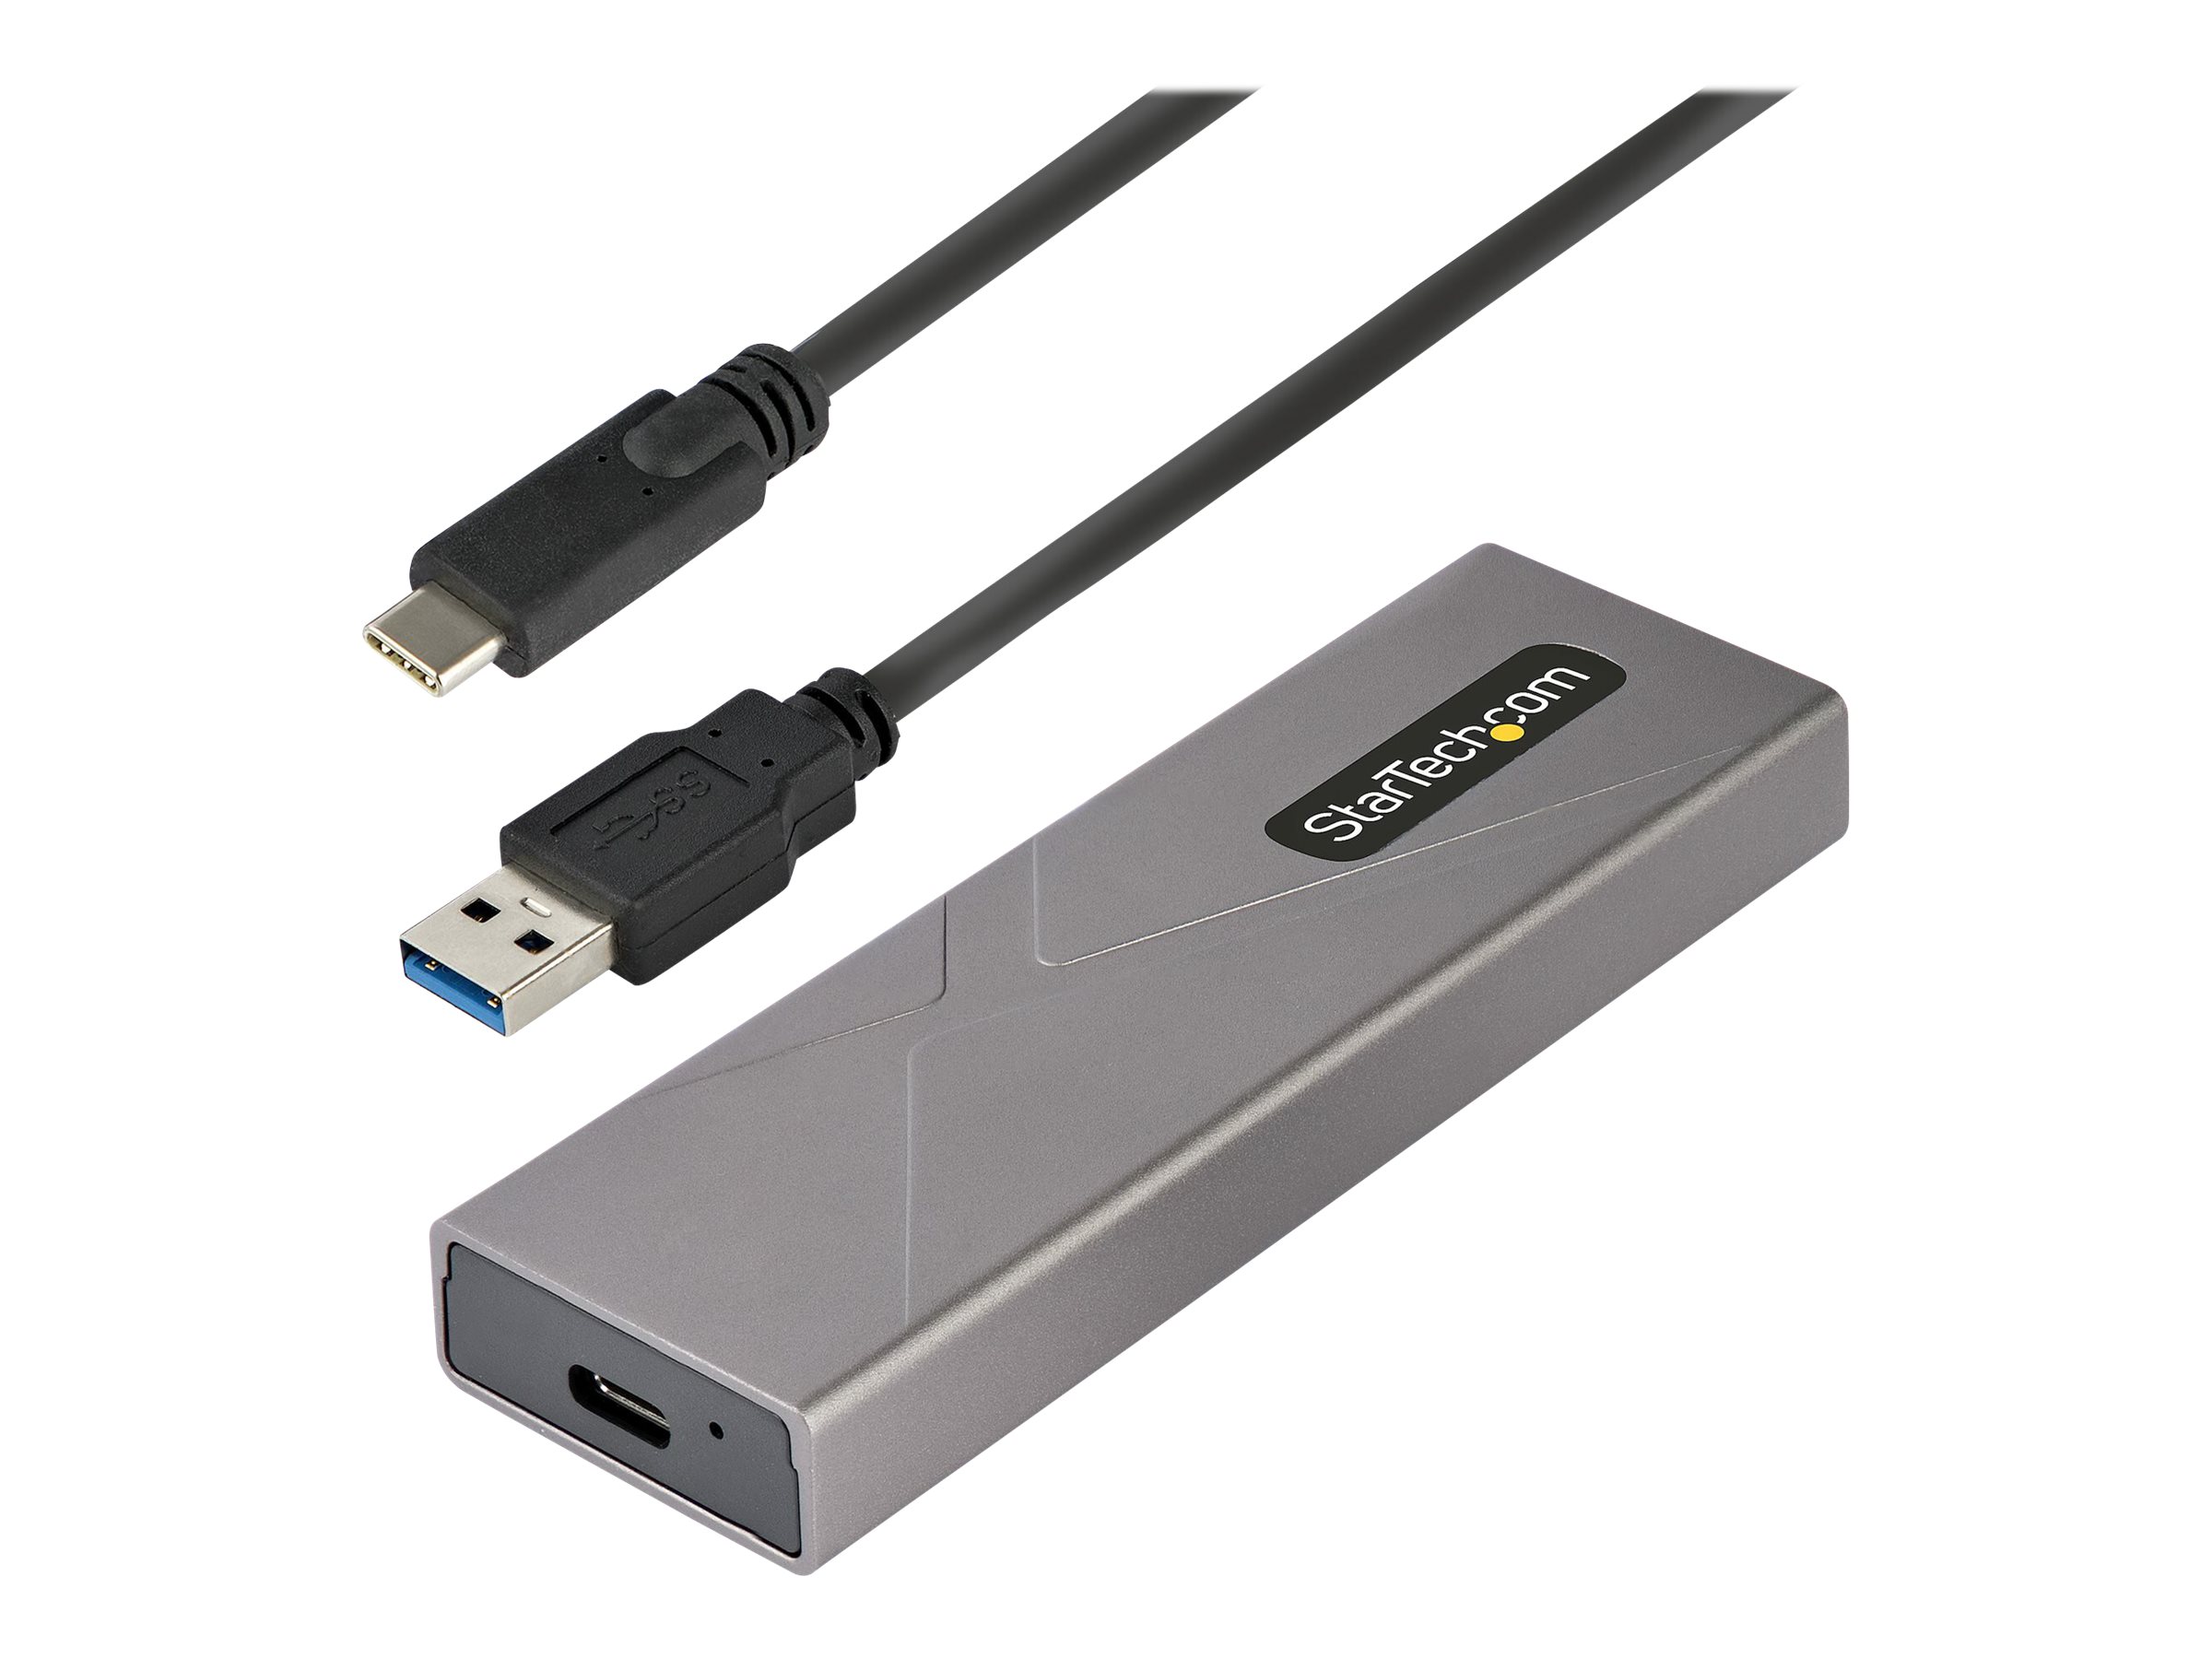 StarTech.com USB-C 10Gbps to M.2 NVMe or M.2 SSD Enclosure, Tool-free M.2 PCIe/SATA NGFF SSD Enclosure, Portable Aluminum Case, USB Type-C &amp; USB-A Host Cables, For 2230/2242/2260/2280 |